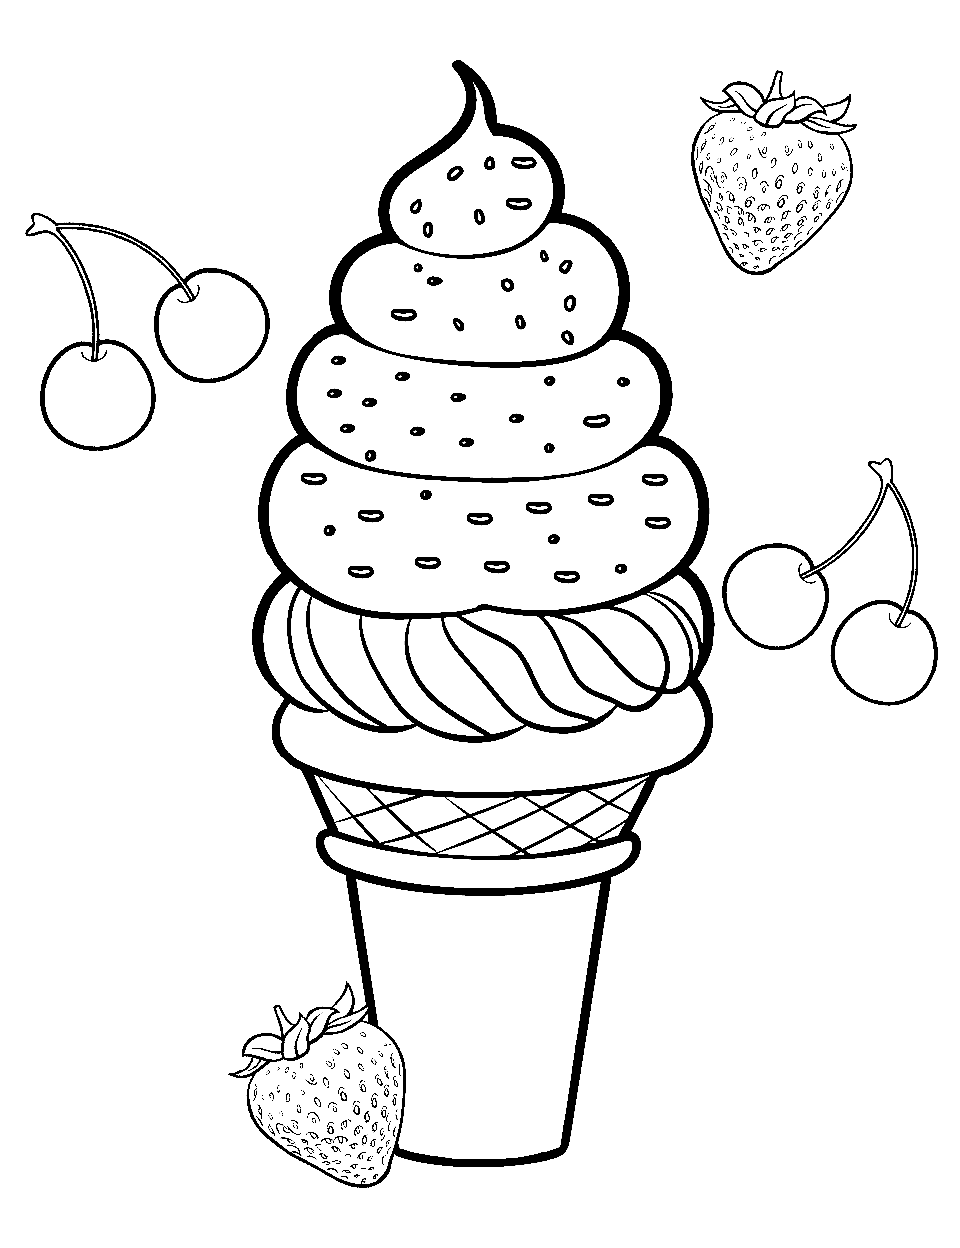 Ice Cream Indulgence Coloring Page - An ice cream cone with its toppings showcased along with it.